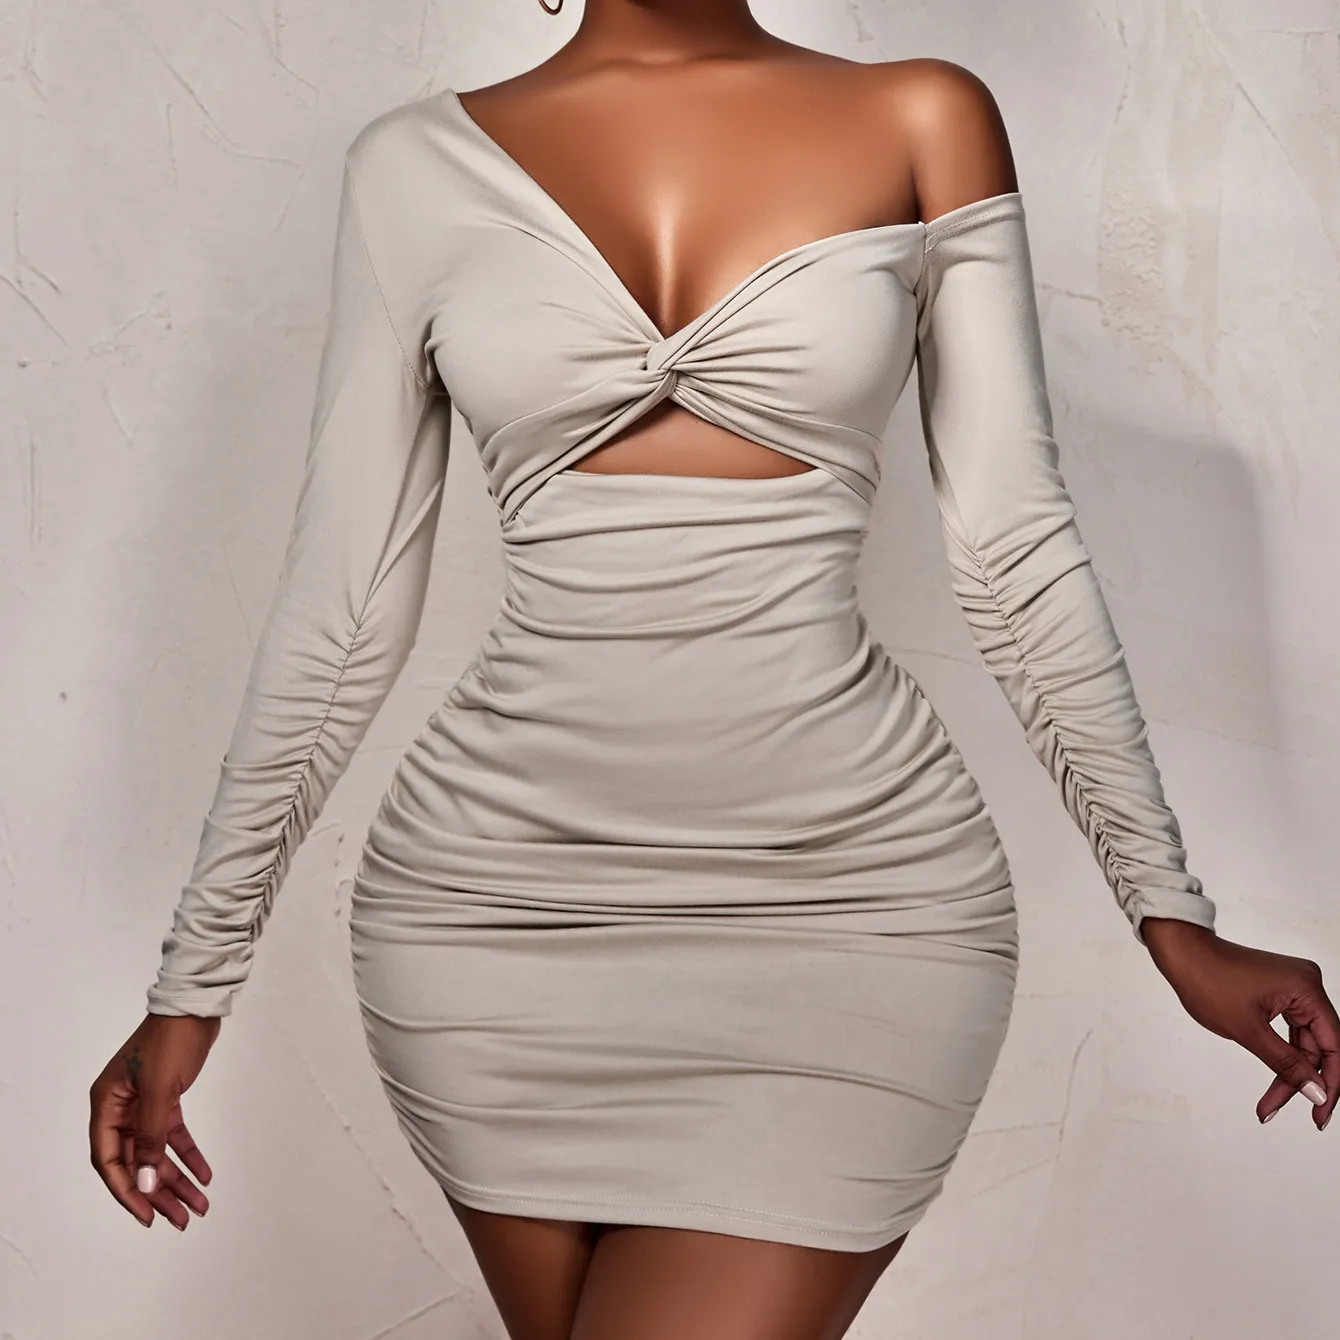 Women Flare Long Sleeve Beige Dress Fashion V Neck Robes Sexy Cut Out Party Club Asymmetrical Dress